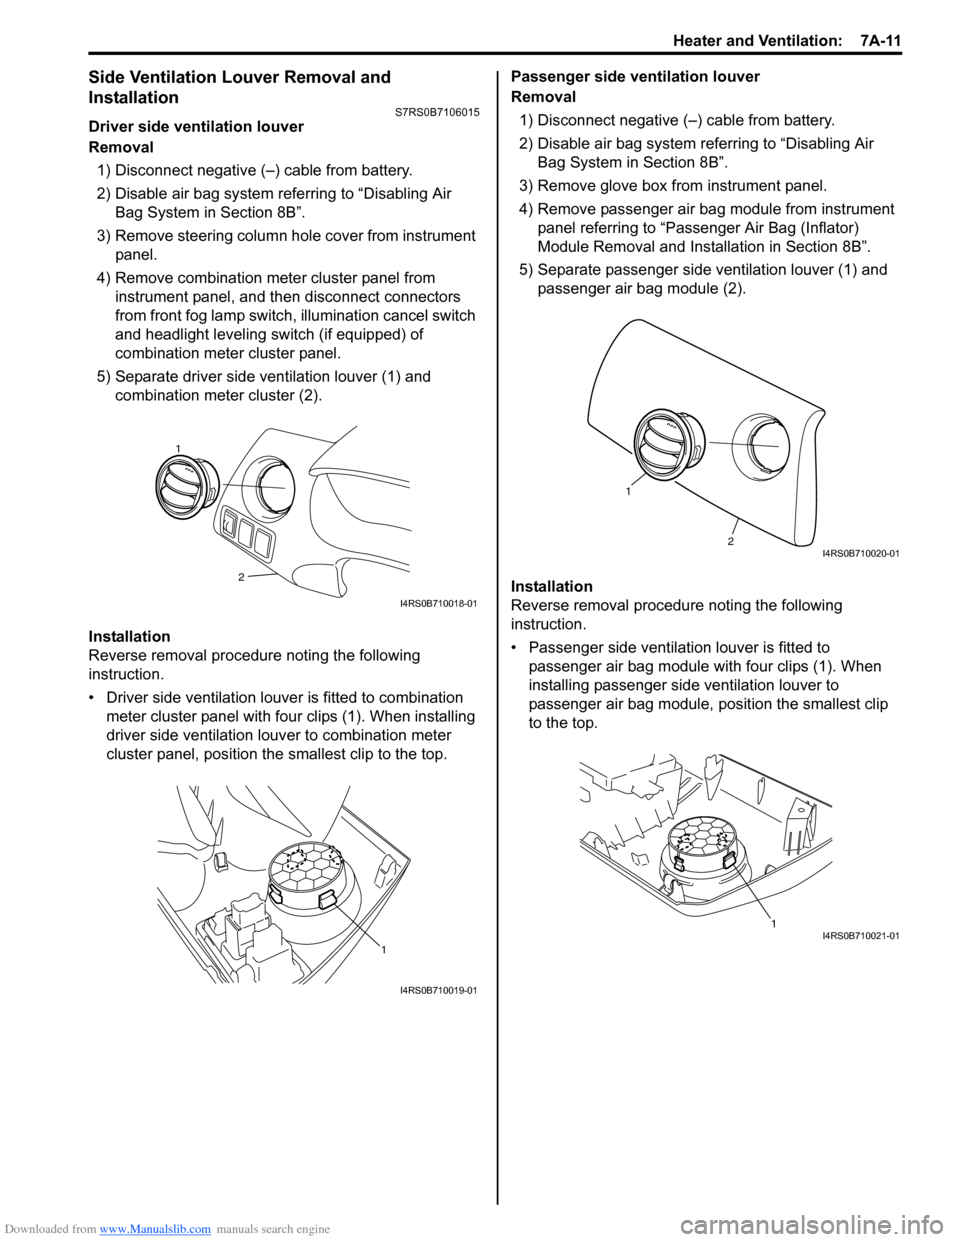 SUZUKI SWIFT 2007 2.G Service Workshop Manual Downloaded from www.Manualslib.com manuals search engine Heater and Ventilation:  7A-11
Side Ventilation Louver Removal and 
Installation
S7RS0B7106015
Driver side ventilation louver
Removal1) Disconn